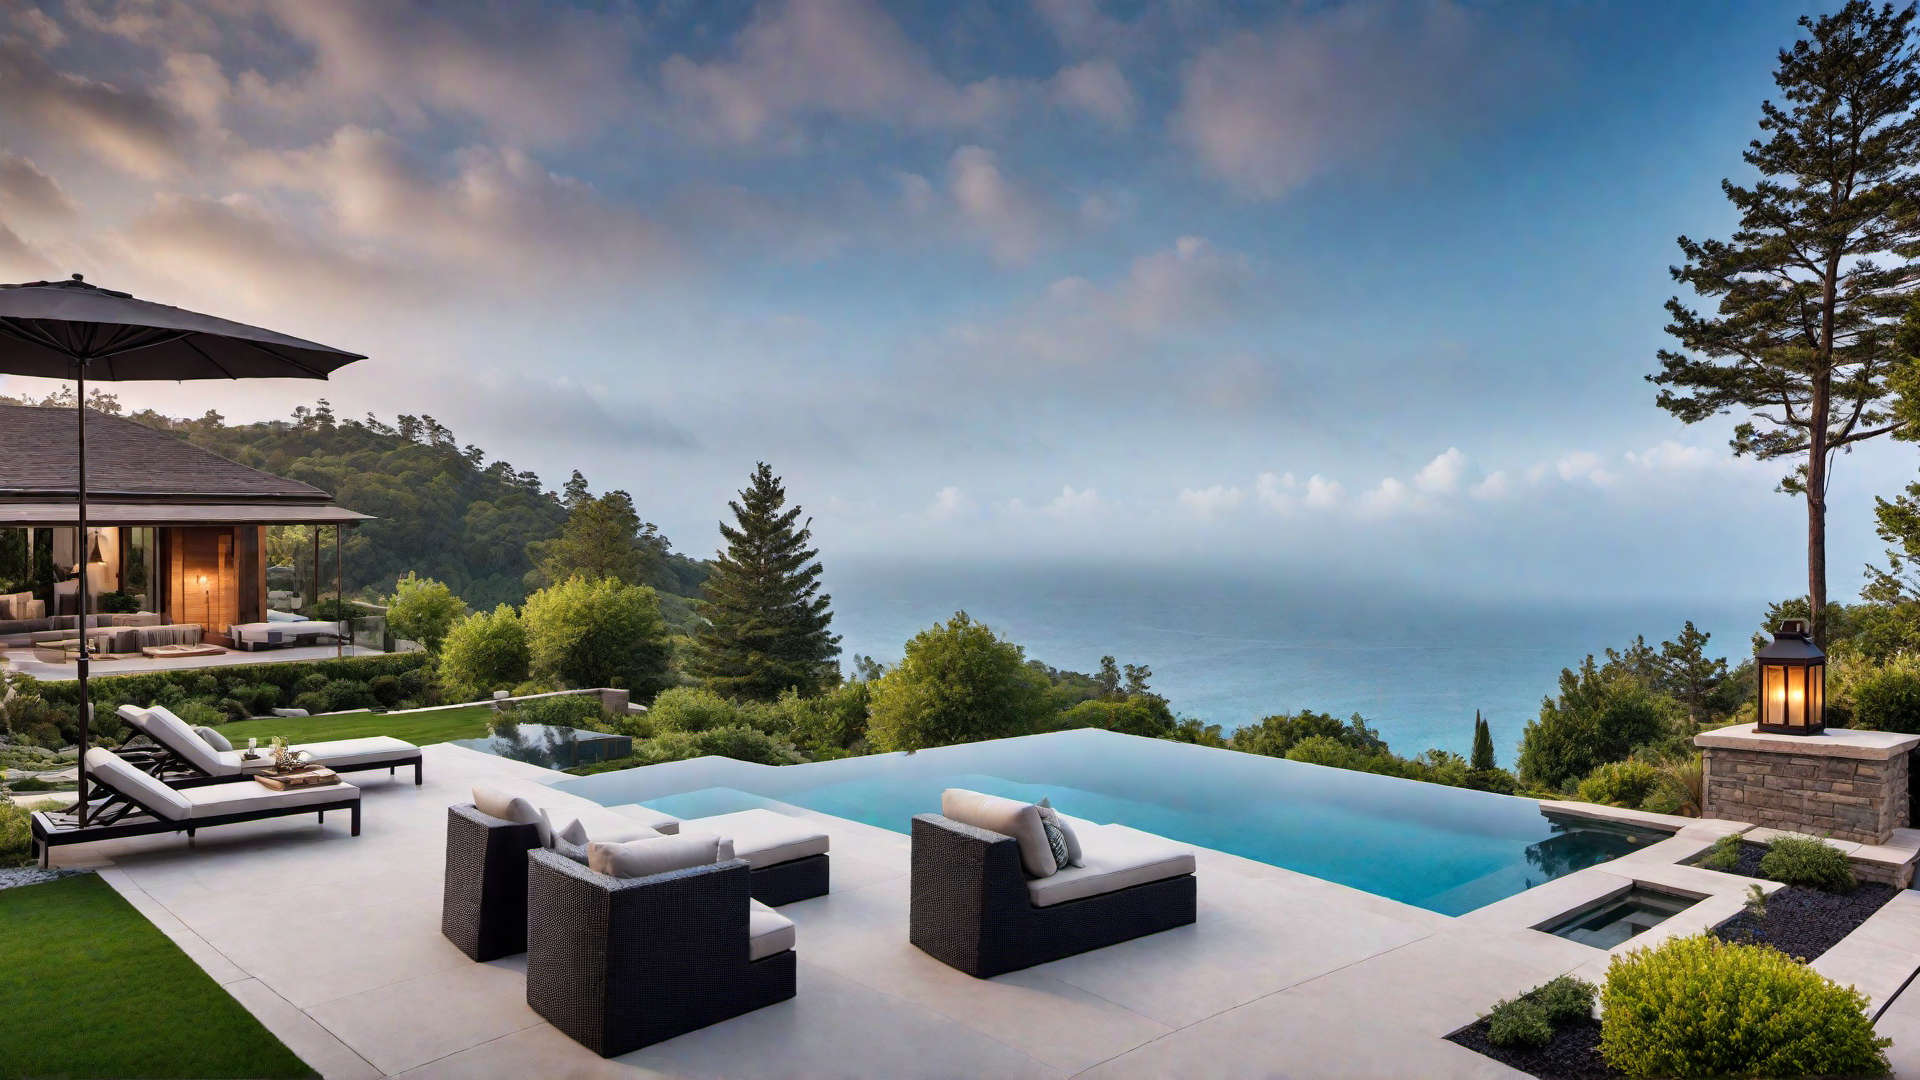 Luxurious Infinity Pool Overlooking a Scenic View